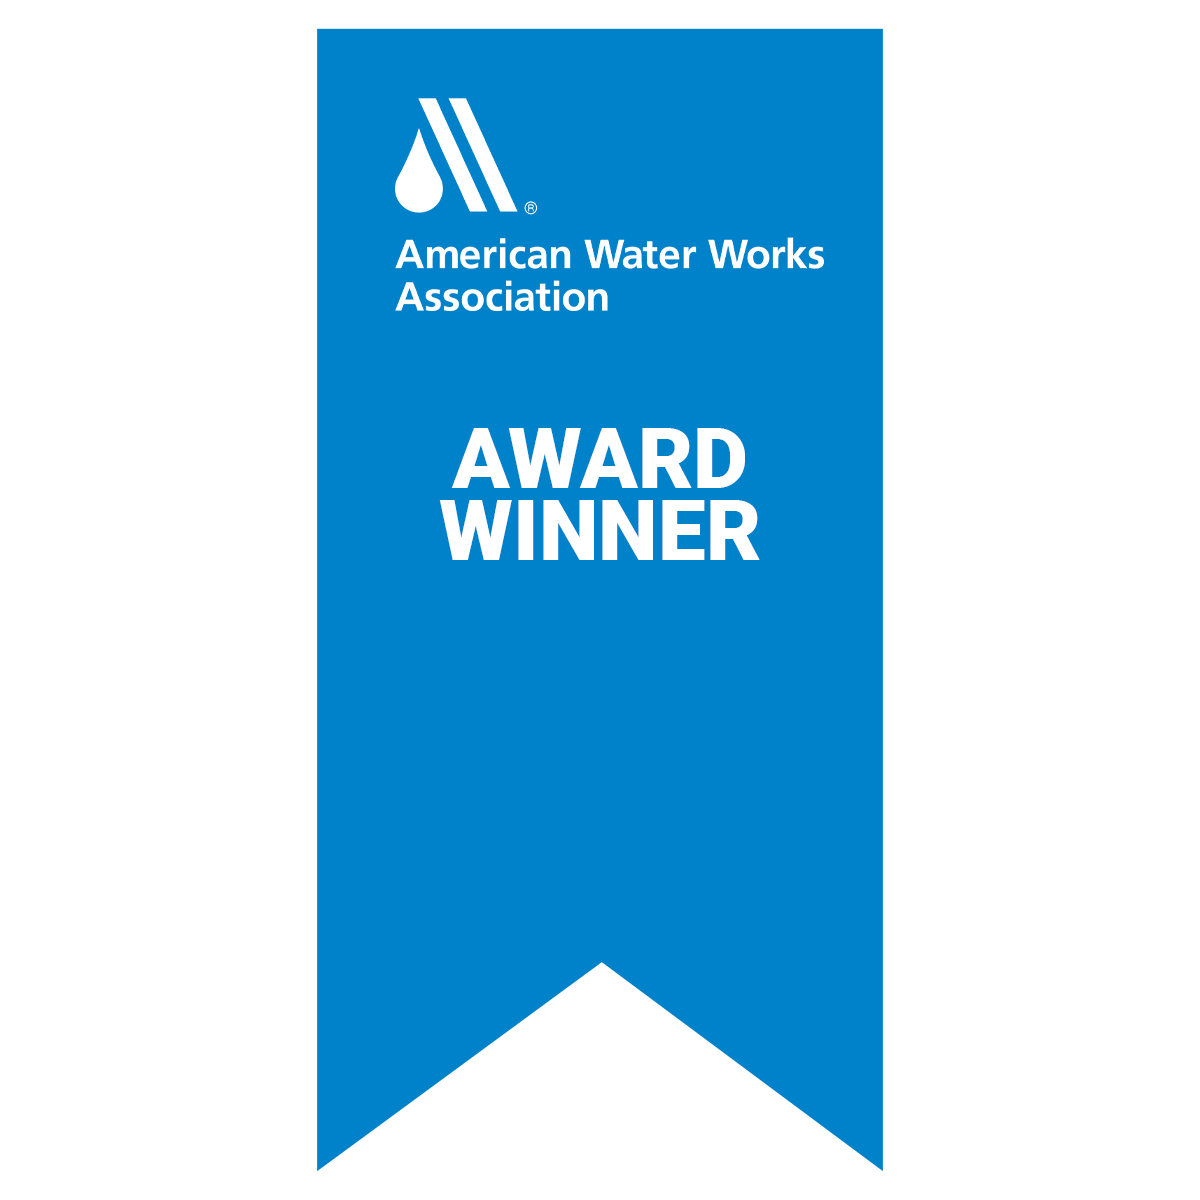 2019 Project of the Year from AWWA New York